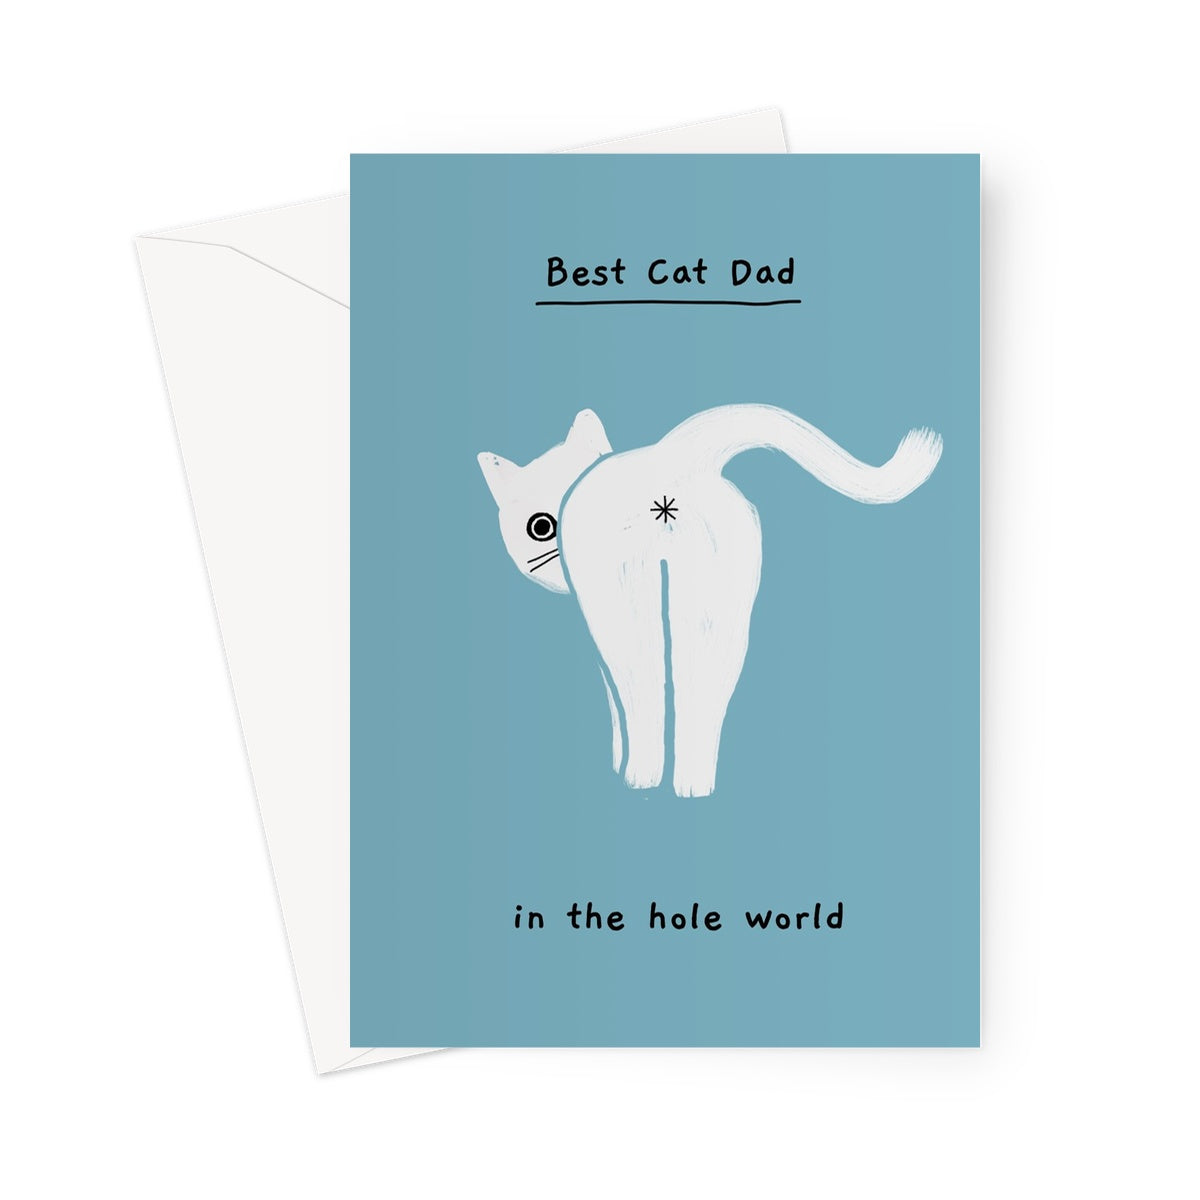 Ken the cat Father's Day card - Best cat Dad in the hole world - Ken looking behind him on teal background